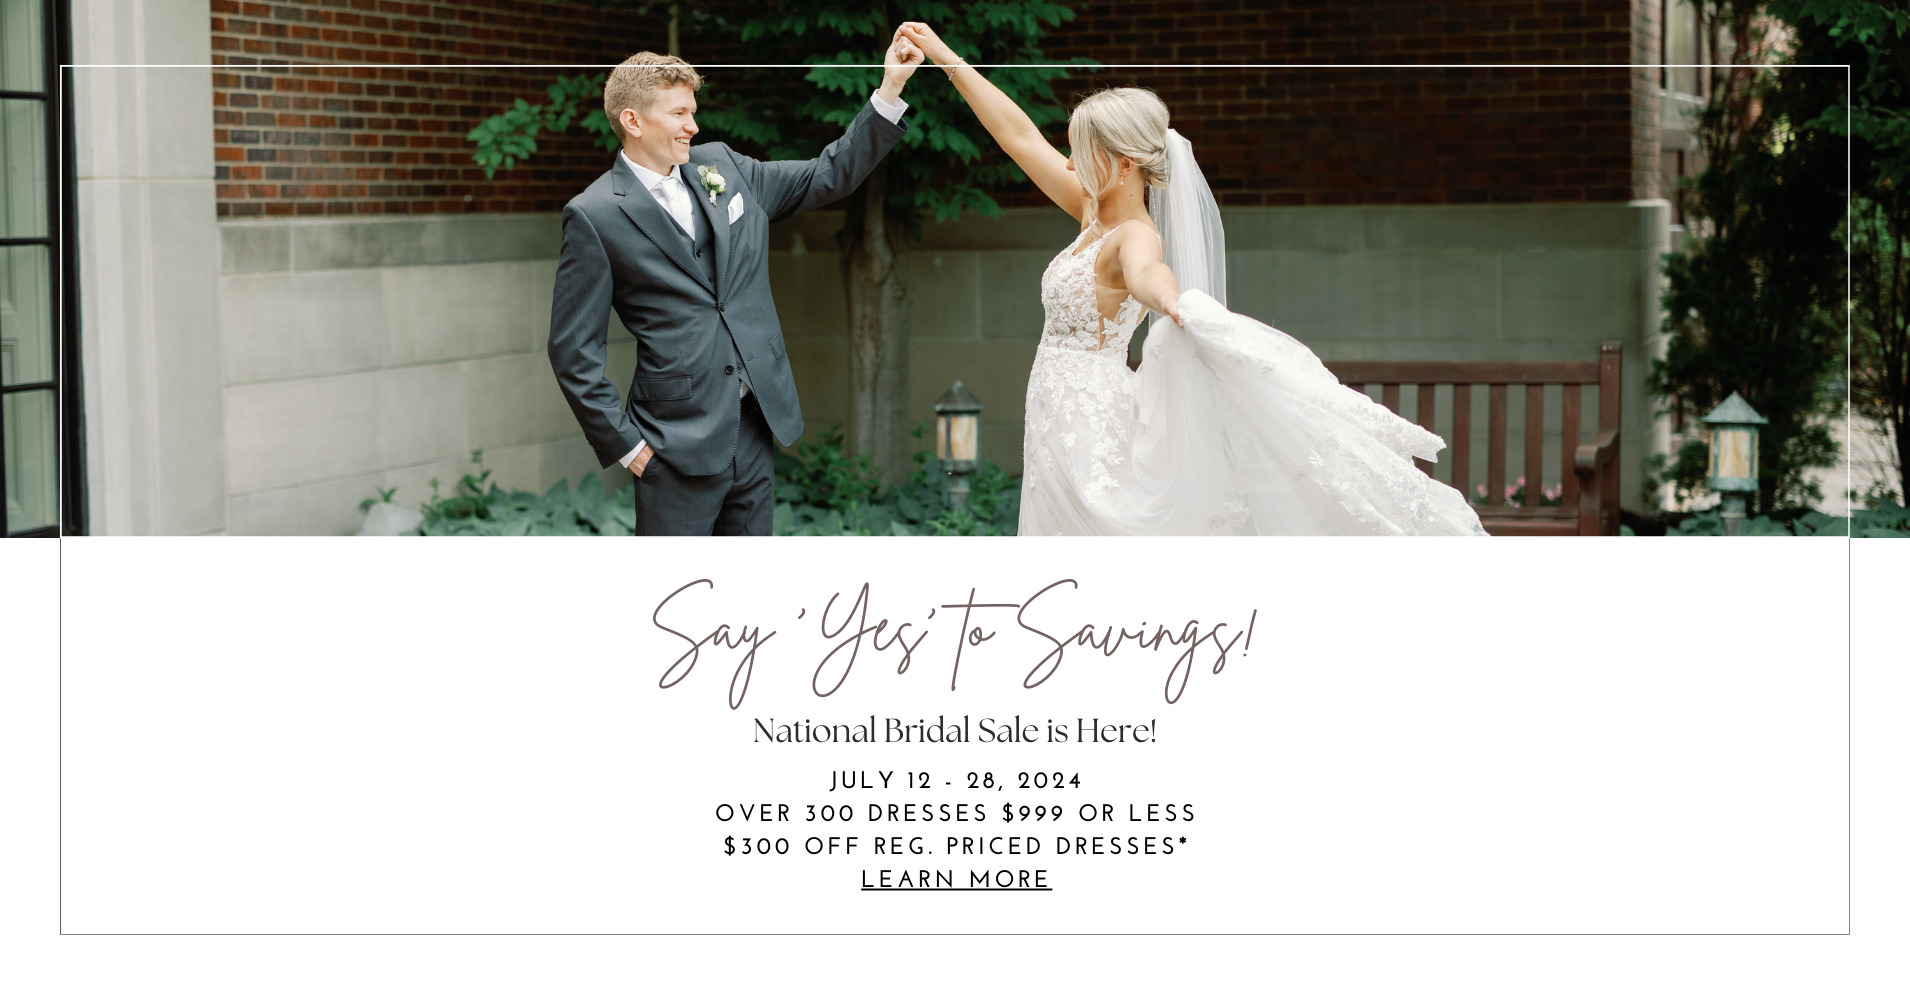 National Bridal Sale poster for the Wedding Shoppe July 12 - 28, 2024